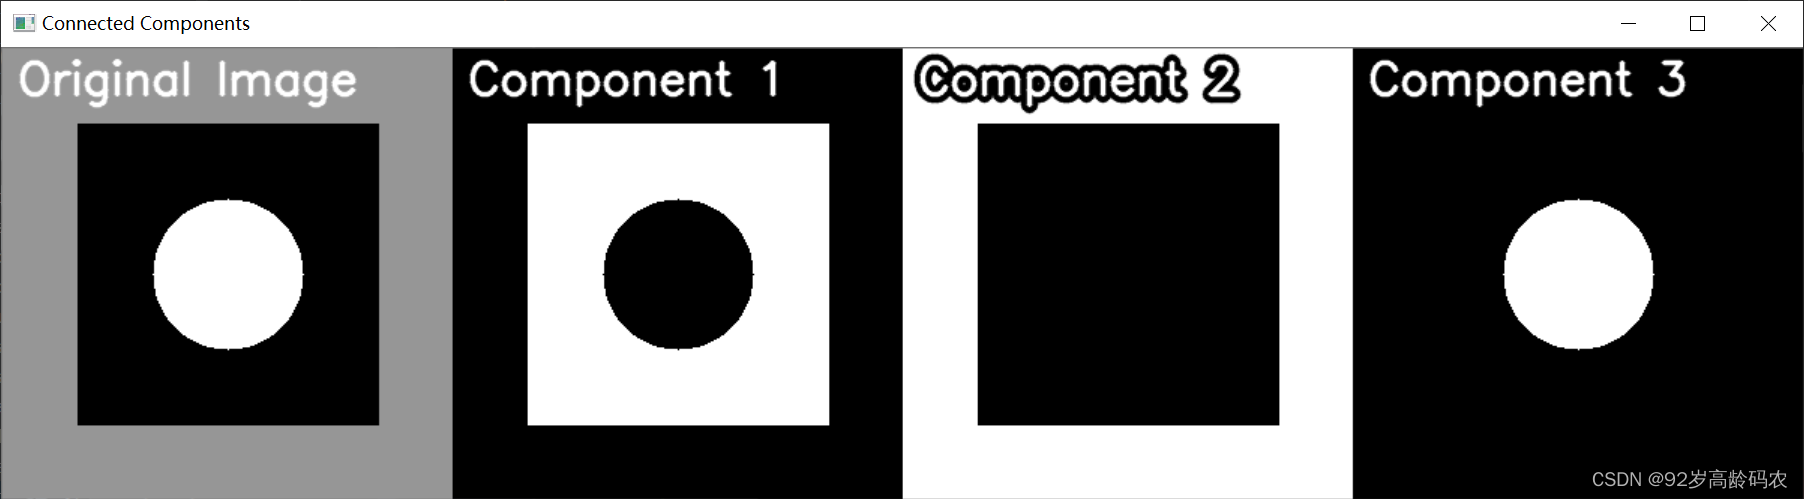 Connected Components